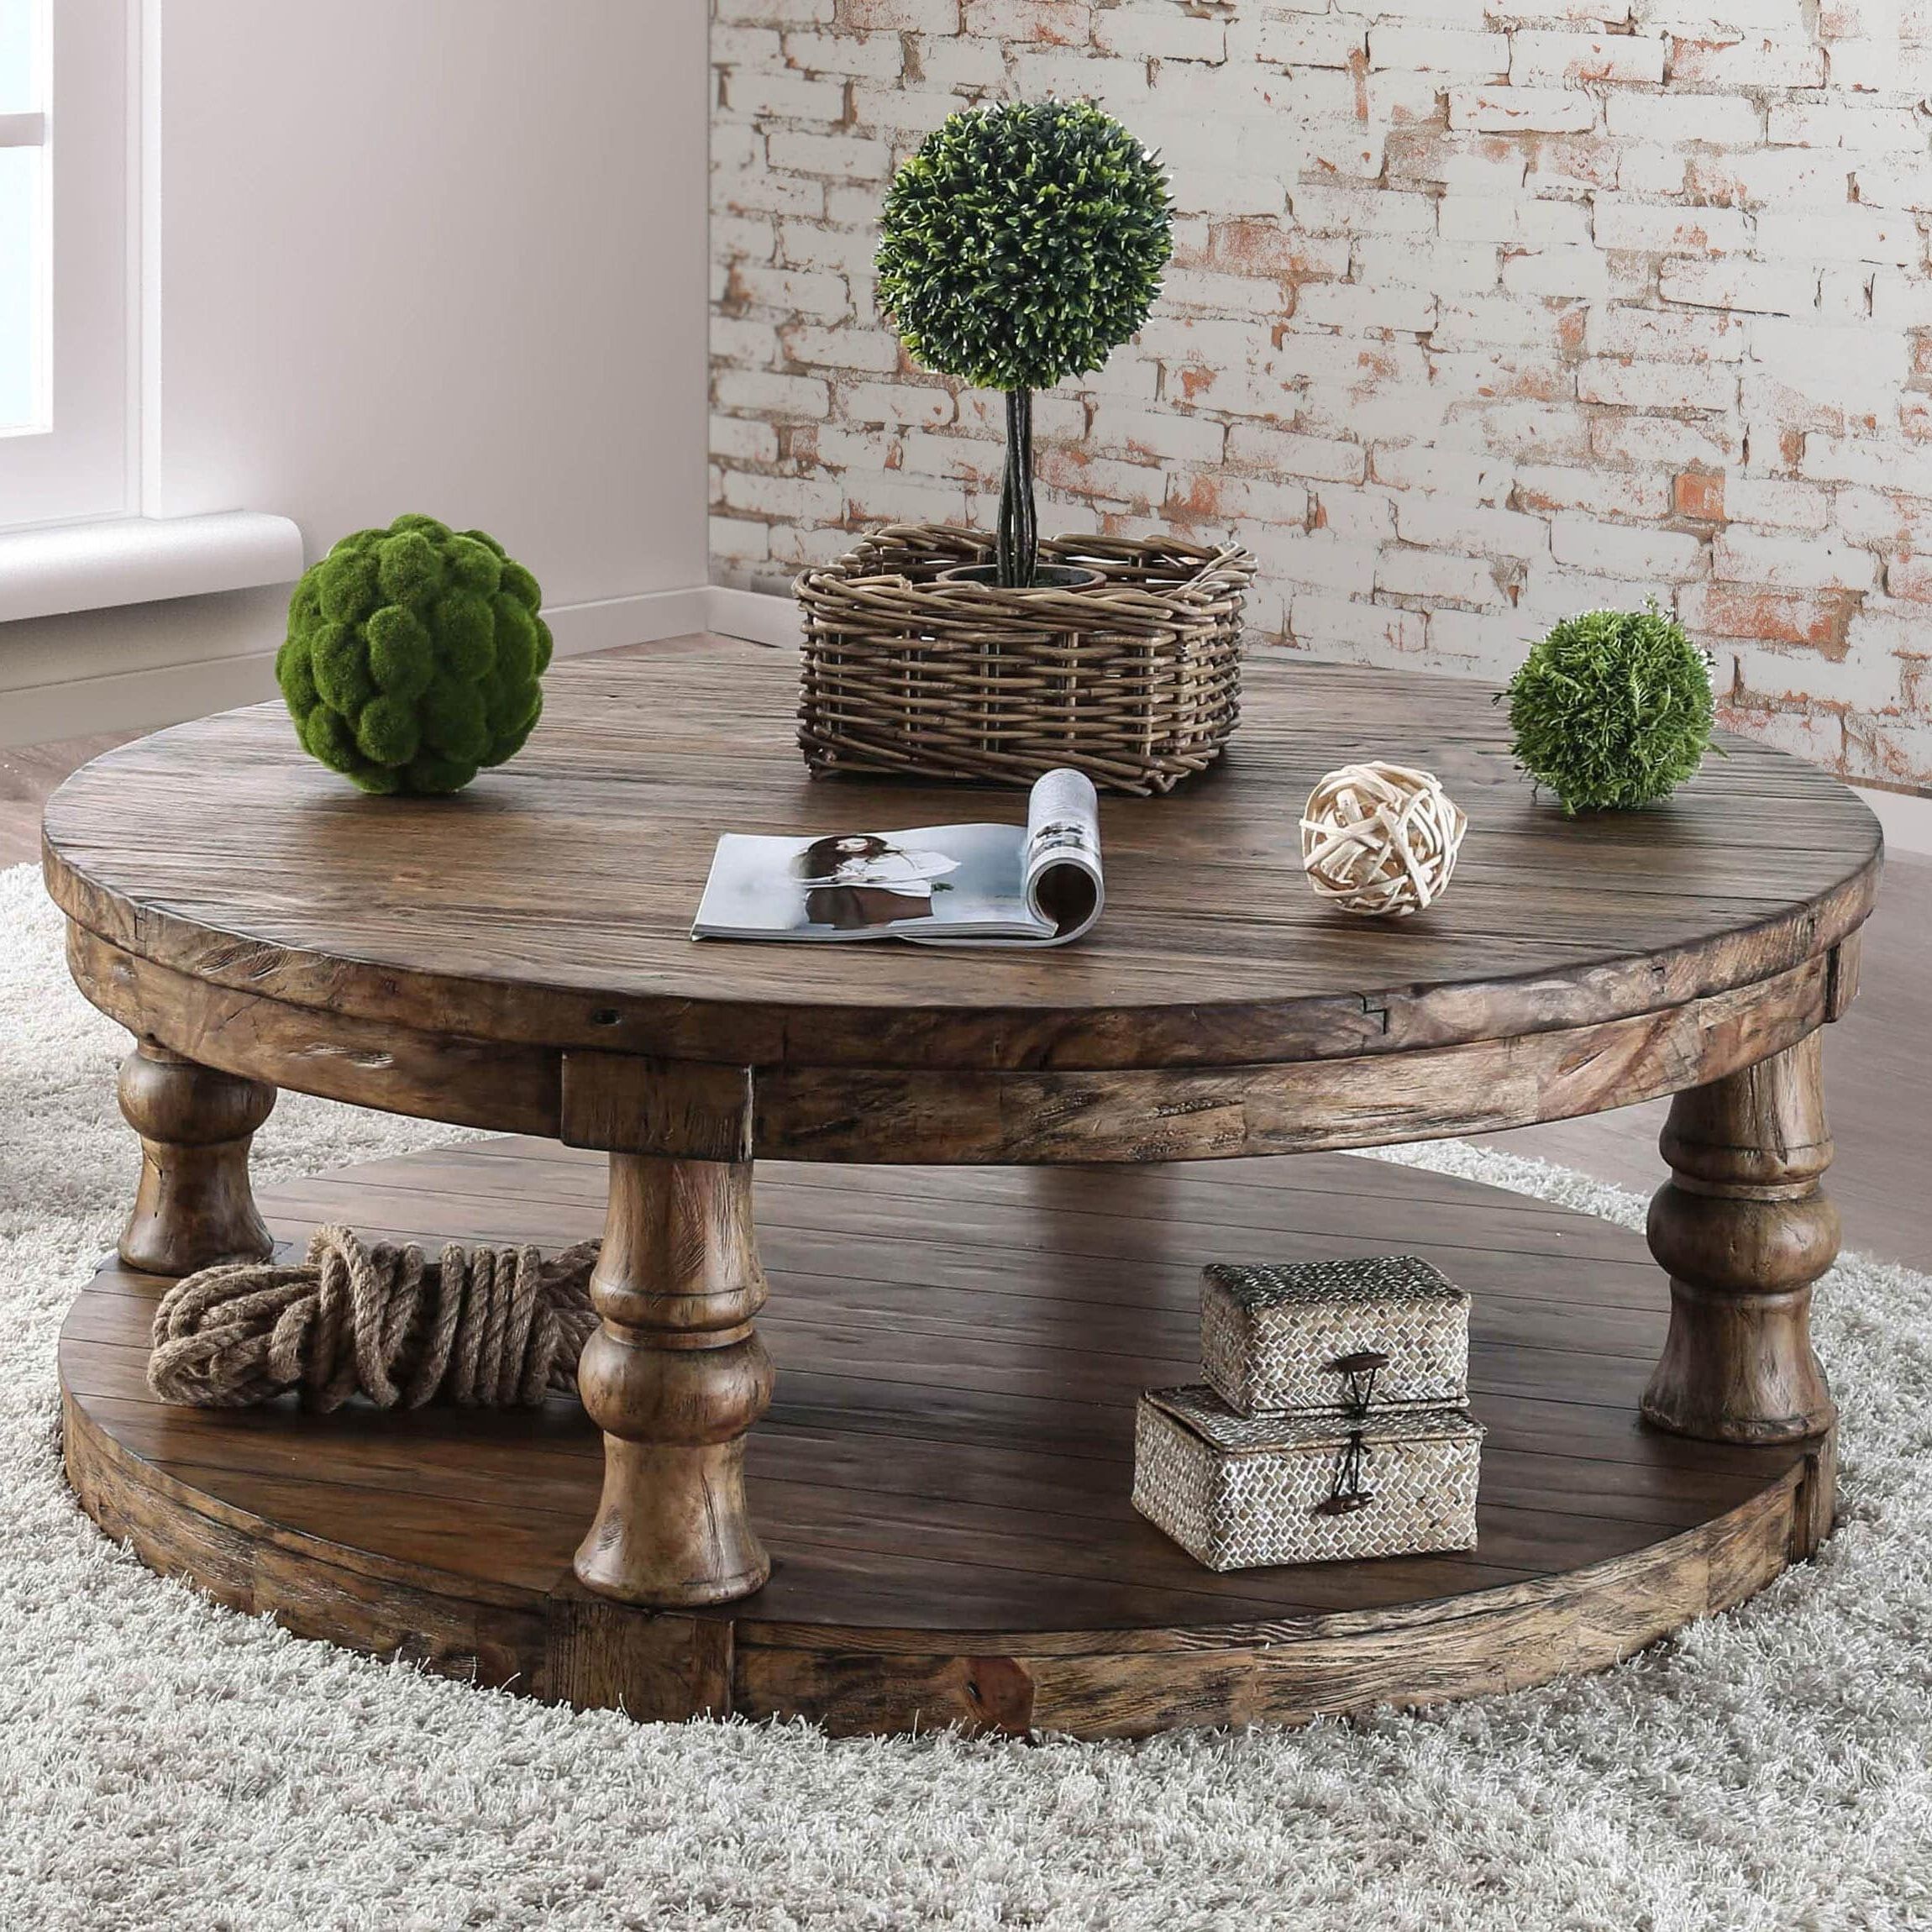 Round Rustic Coffee Table Sets – Rustic Coffee Tables That You Need To In Brown Rustic Coffee Tables (Gallery 17 of 20)